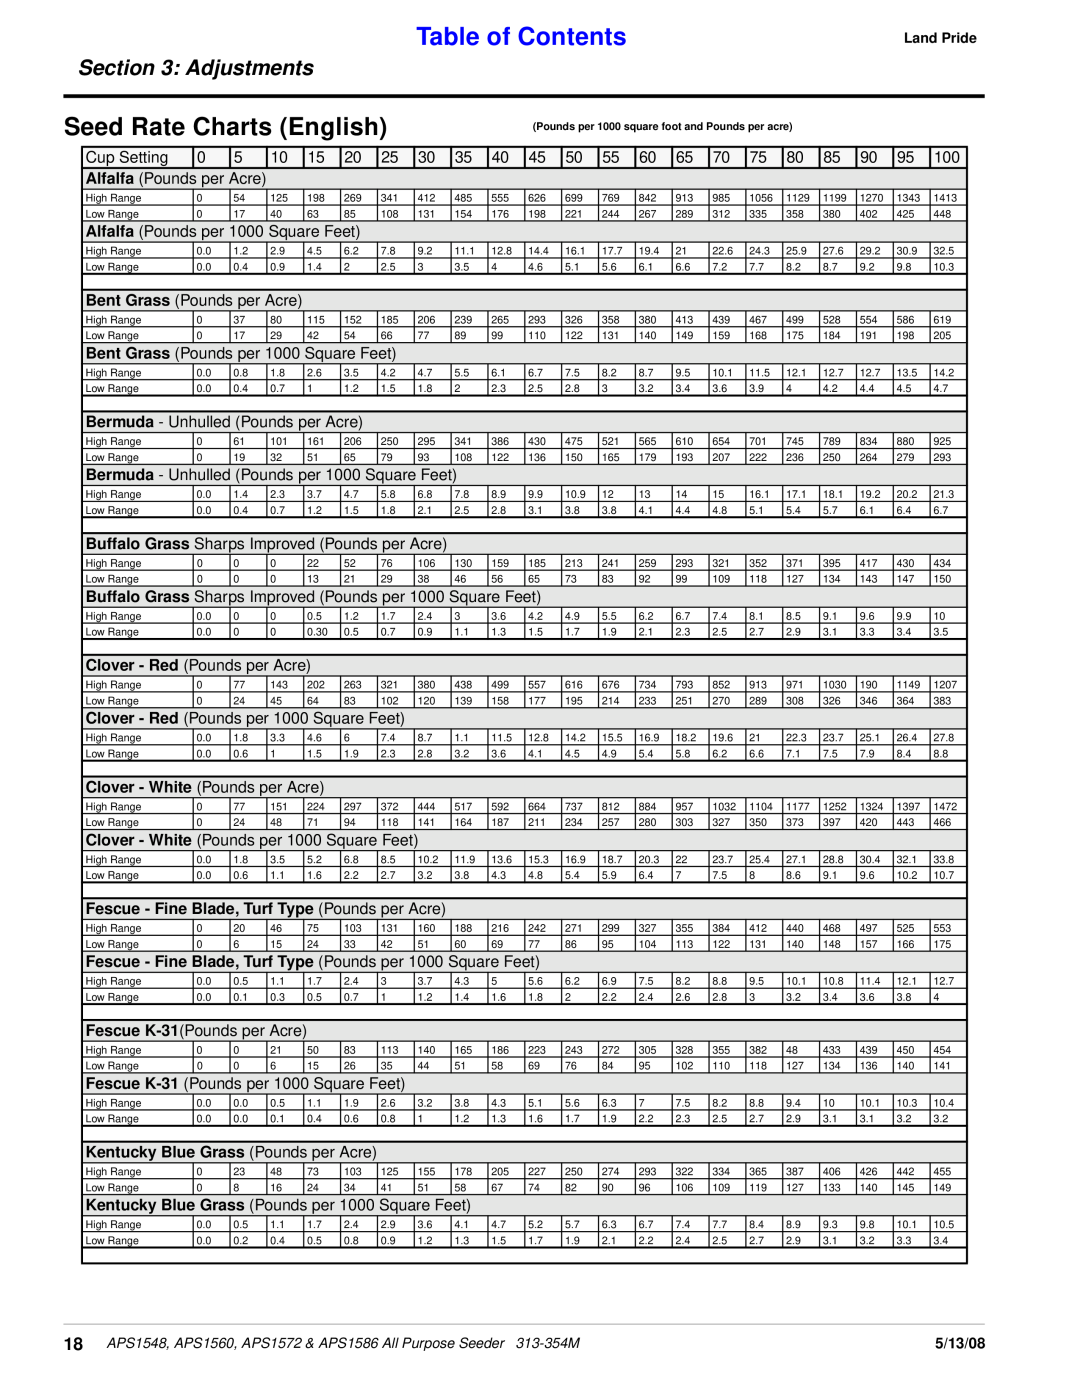 Land Pride APS1560, APS1572, APS1586, APS1548 manual Seed Rate Charts English, Table of Contents, Adjustments 